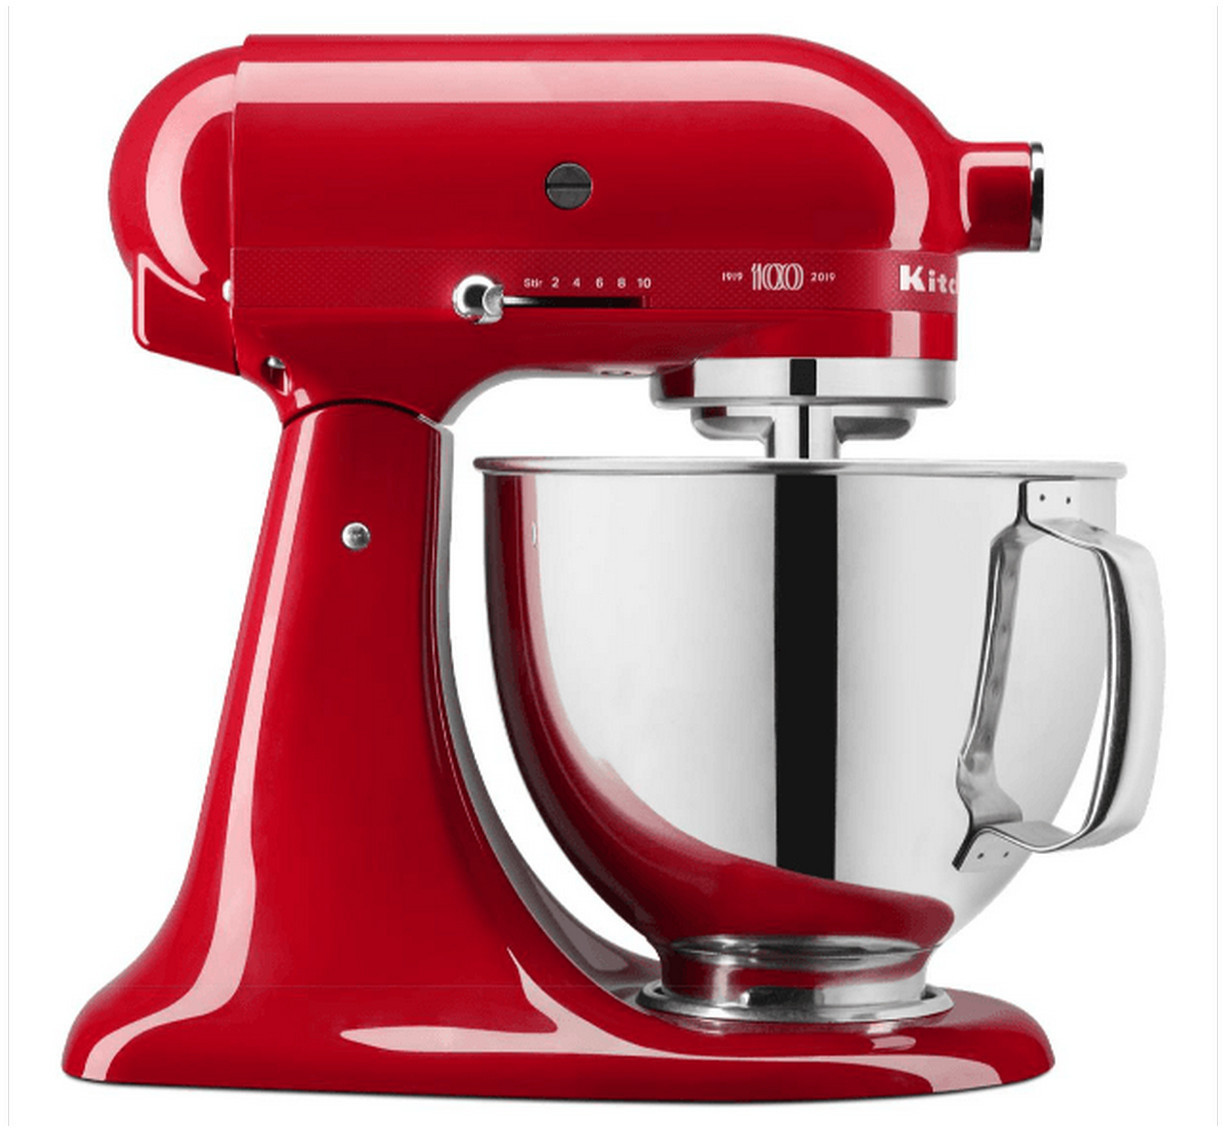 KitchenAid 5KSM180HESD Queen of Heart Passion Red